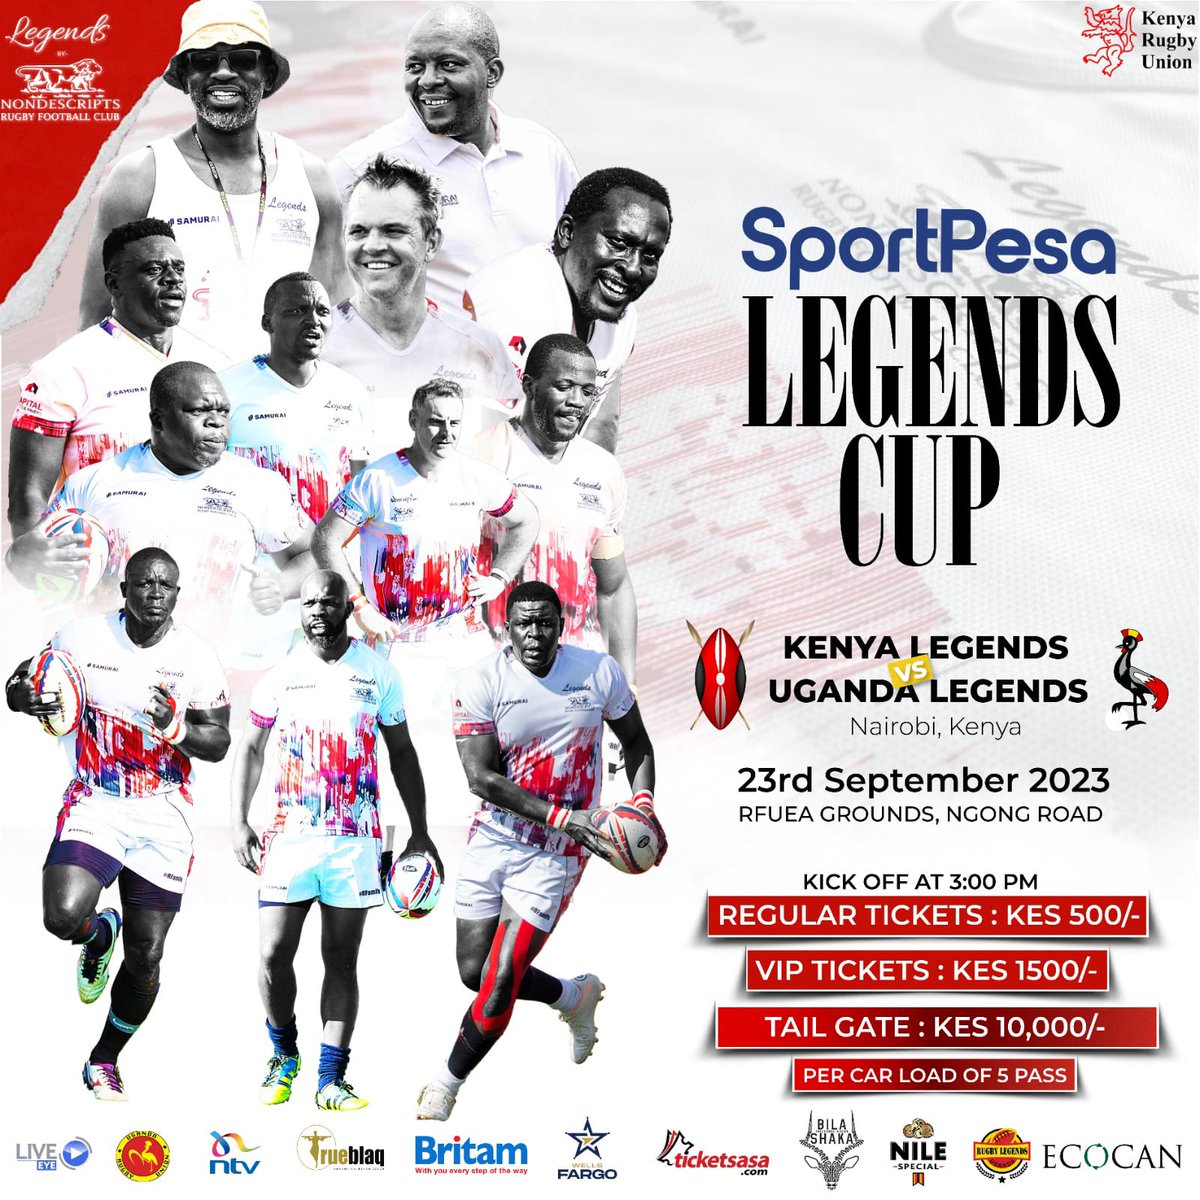 Hey,today the legends cup would take place today at 3pm,Kenya vs Uganda legends,get tickets and come enjoy the gameLegends Cup
#SportPesaLegendsCup